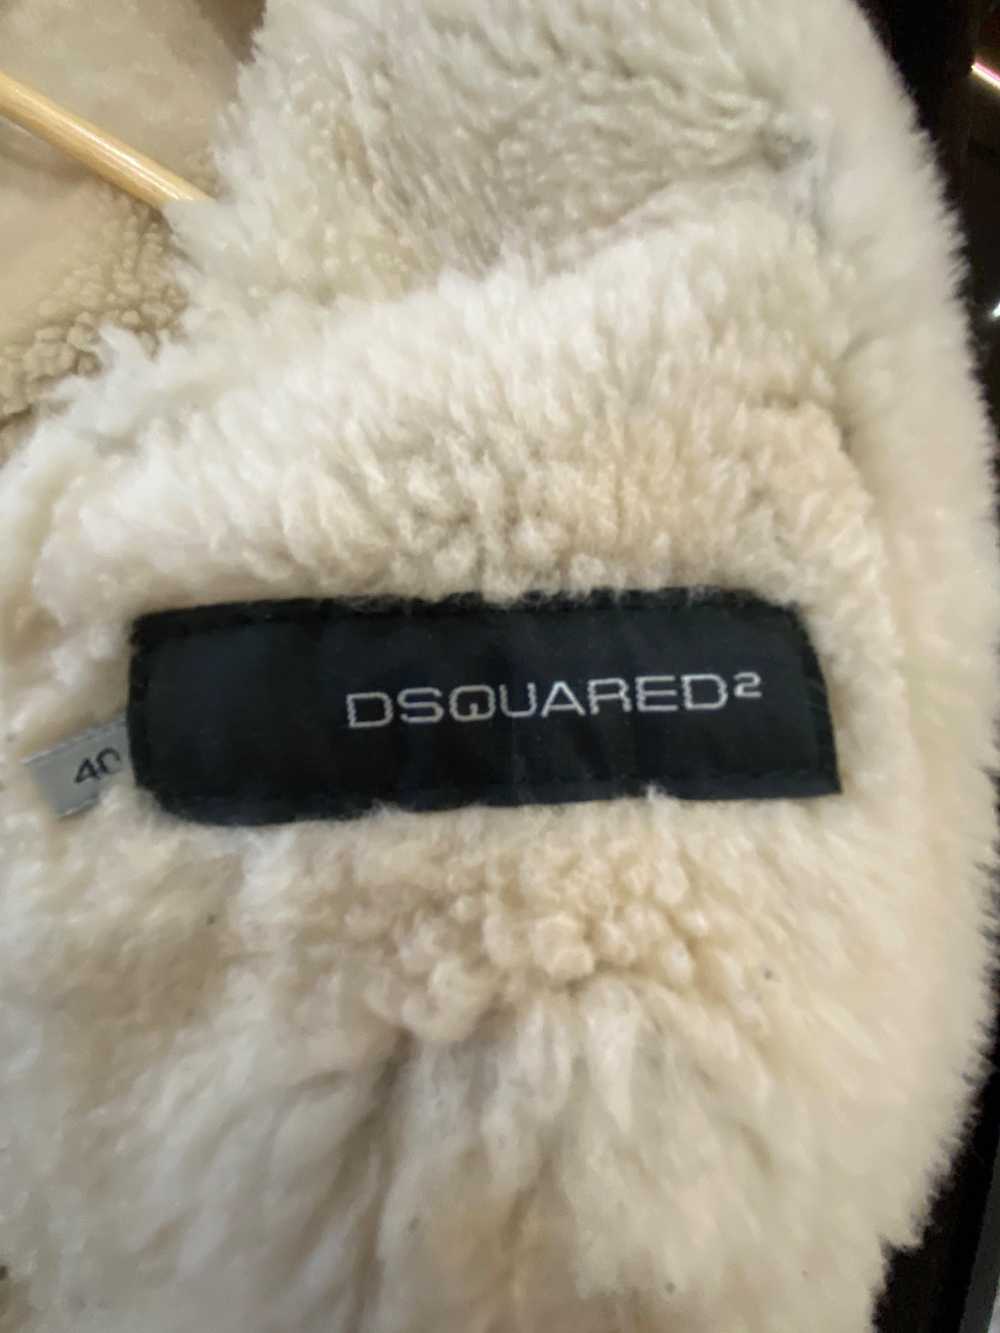 DSquared Brown Leather & Shearling Jacket - image 5